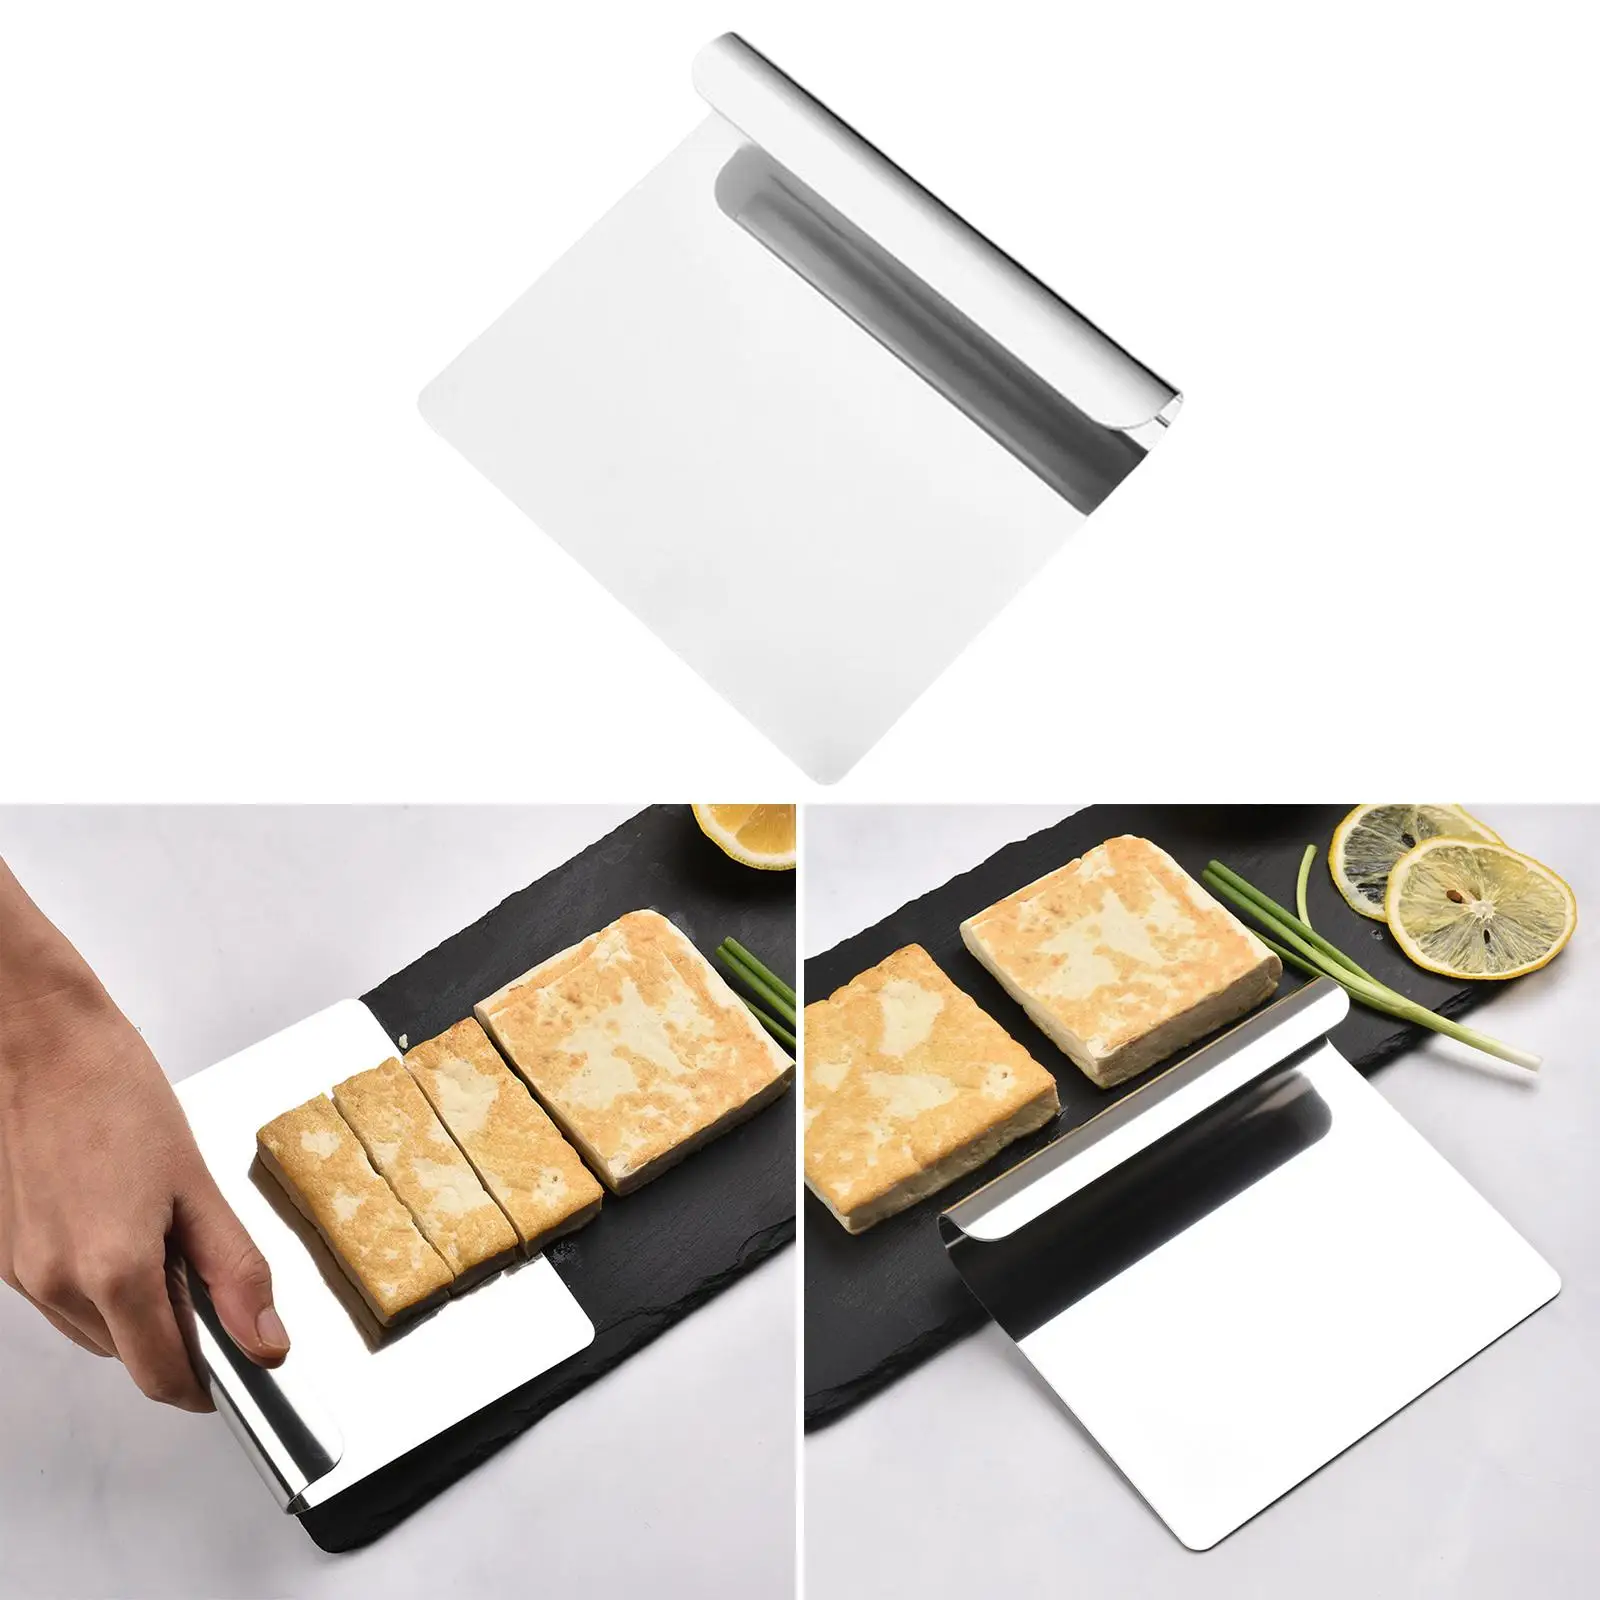 Multipurpose Bench Scraper Dough Slicing Cutting Tool with Grip Portable Dough Cutter for Chopping Nuts Bread Cutting Pizza